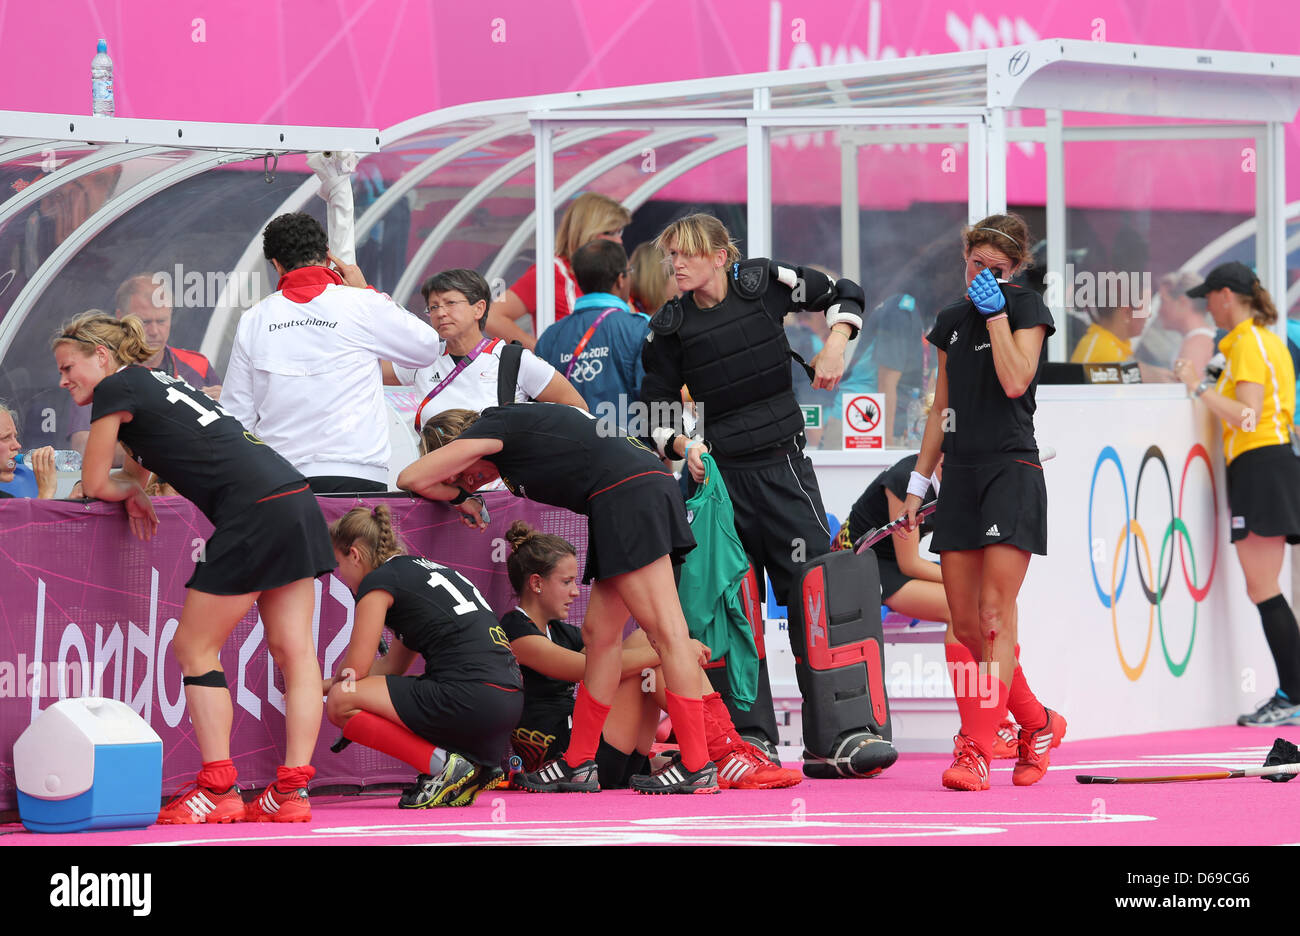 Germany's Katharina Otte (L-R) Lisa Hahn, Natascha Keller, goakeeper Yvonne Frank and Christina Schuetze look dejected after the match Germany vs New Zealand during the London 2012 Olympic Games Hockey tournament in the Riverside Arena in London, Great Britain, 06 August 2012. Photo: Christian Charisius dpa  +++(c) dpa - Bildfunk+++ Stock Photo